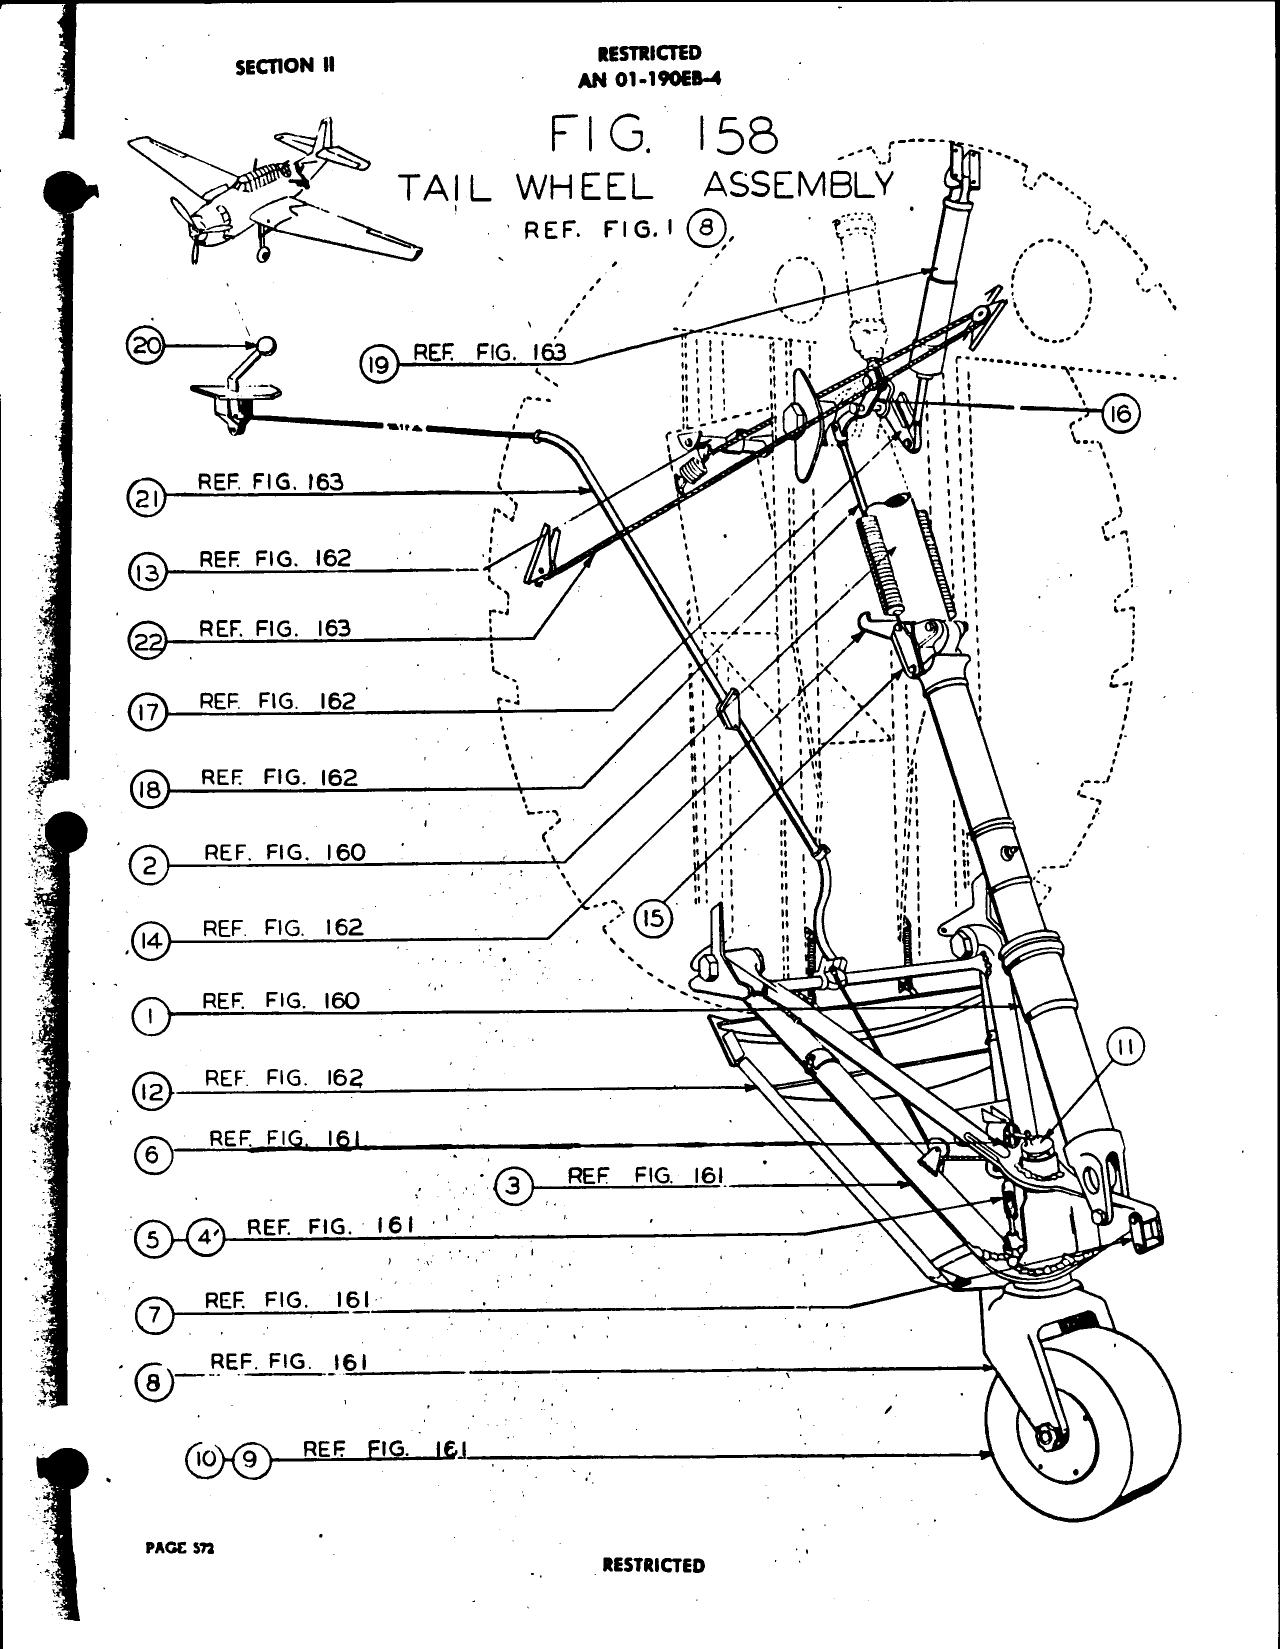 Sample page 5 from AirCorps Library document: Aircraft Parts Catalog TBM-3 (3 of 3)